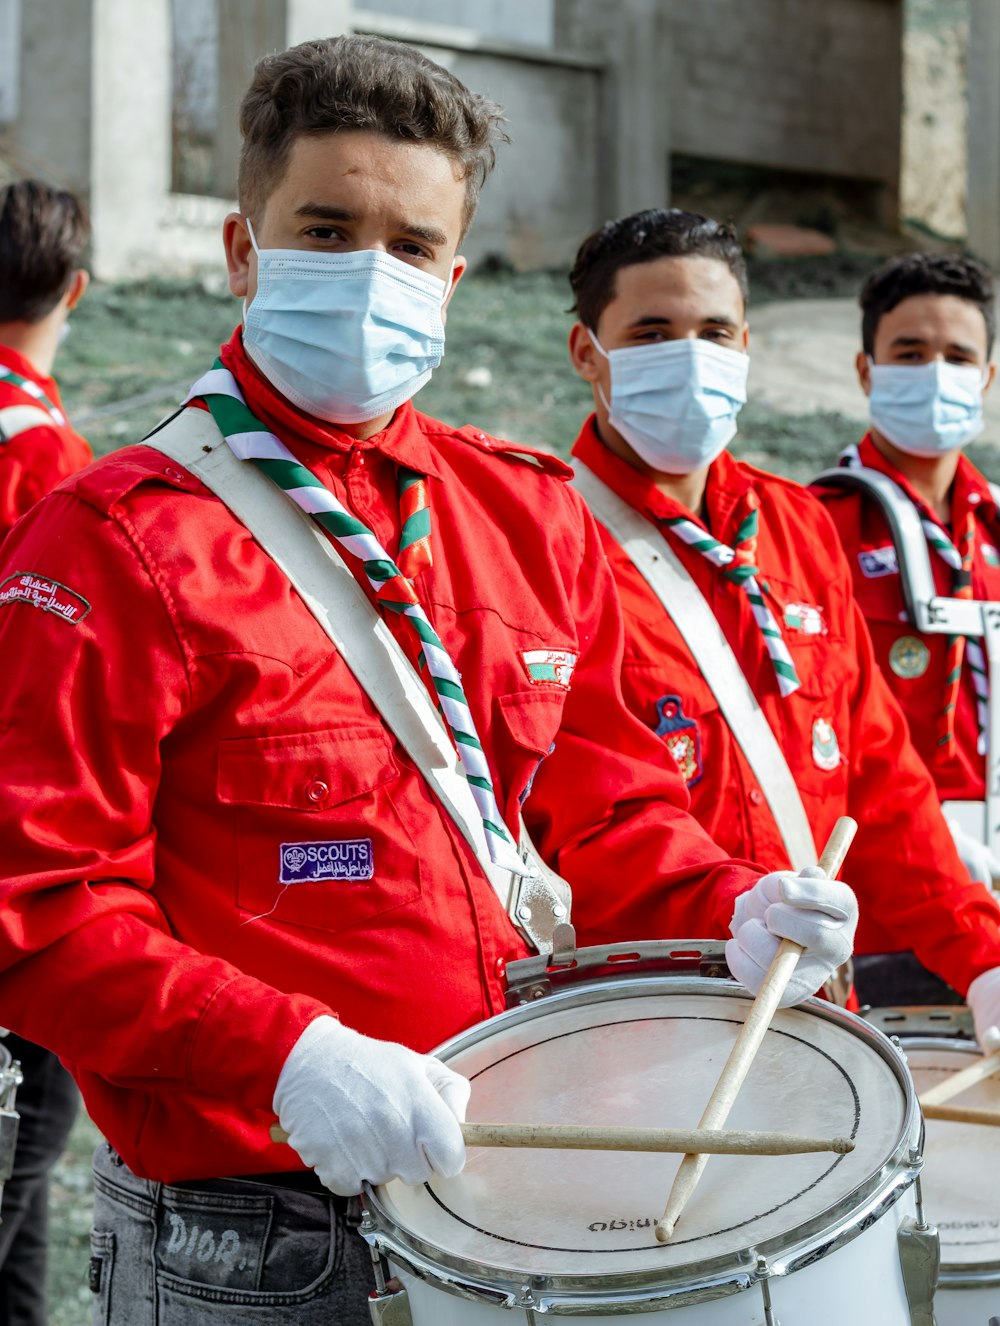 2 men in red and white uniform playing drum